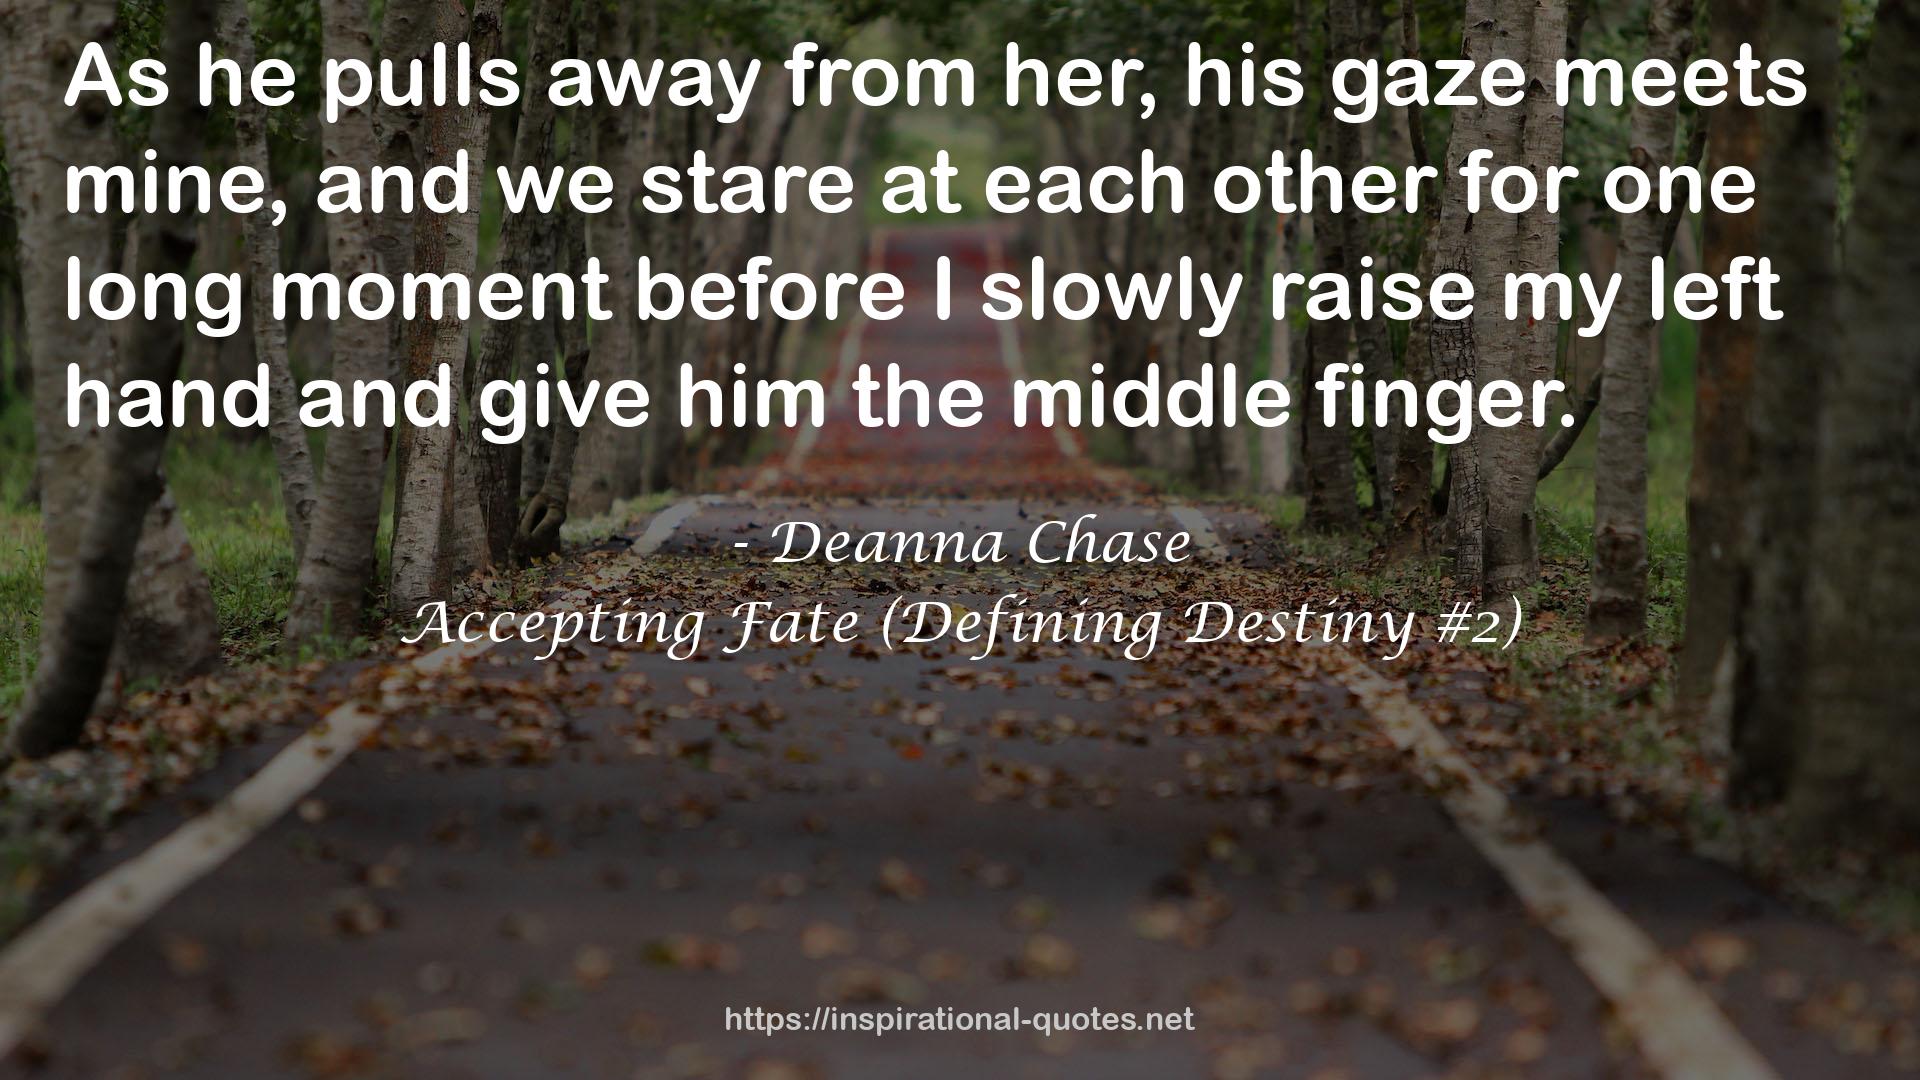 Accepting Fate (Defining Destiny #2) QUOTES